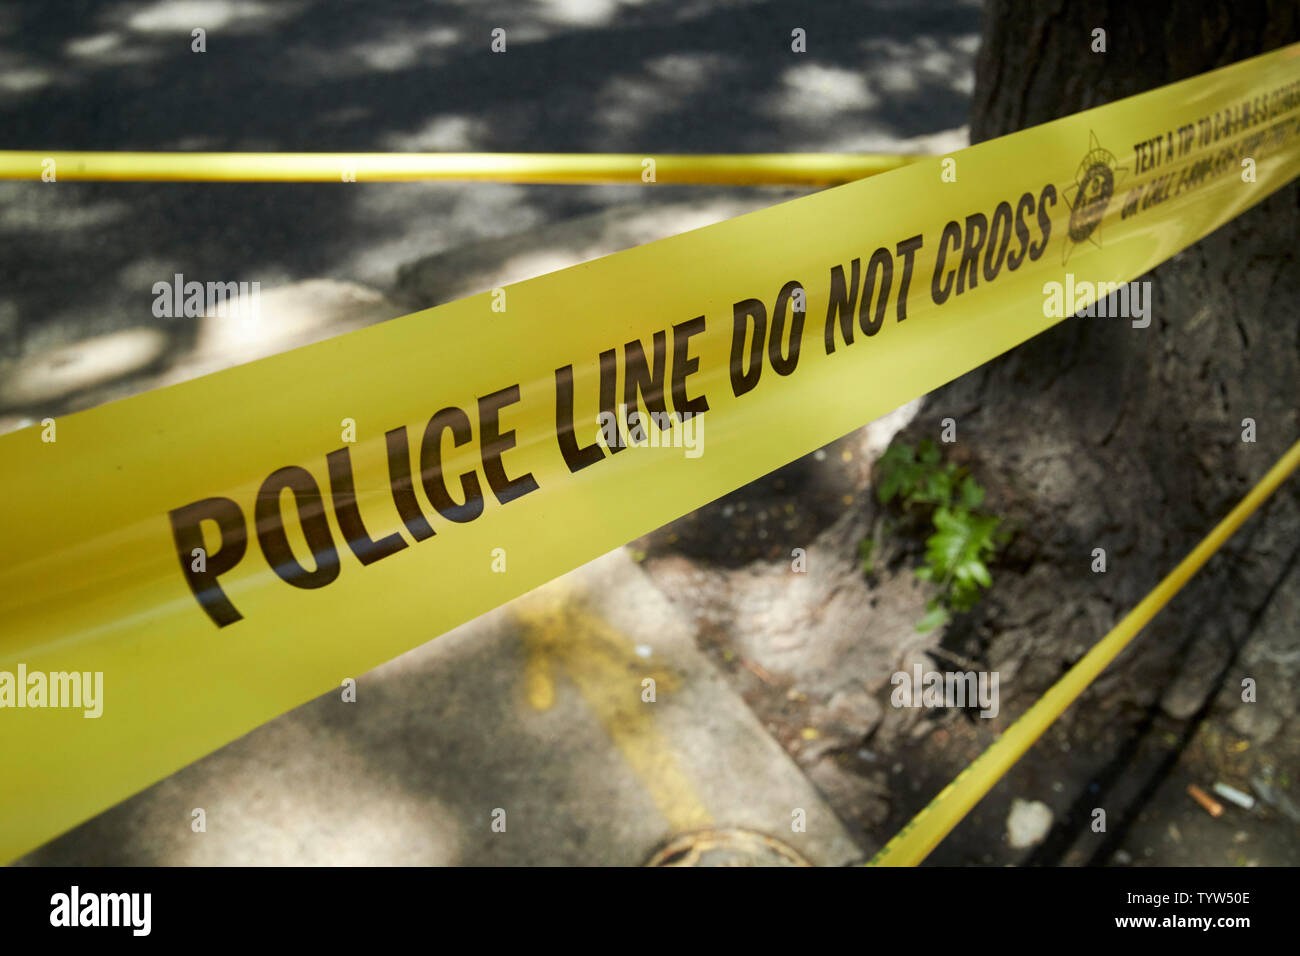 Police Line do not cross yellow incident tape chicago police department Chicago IL USA Stock Photo